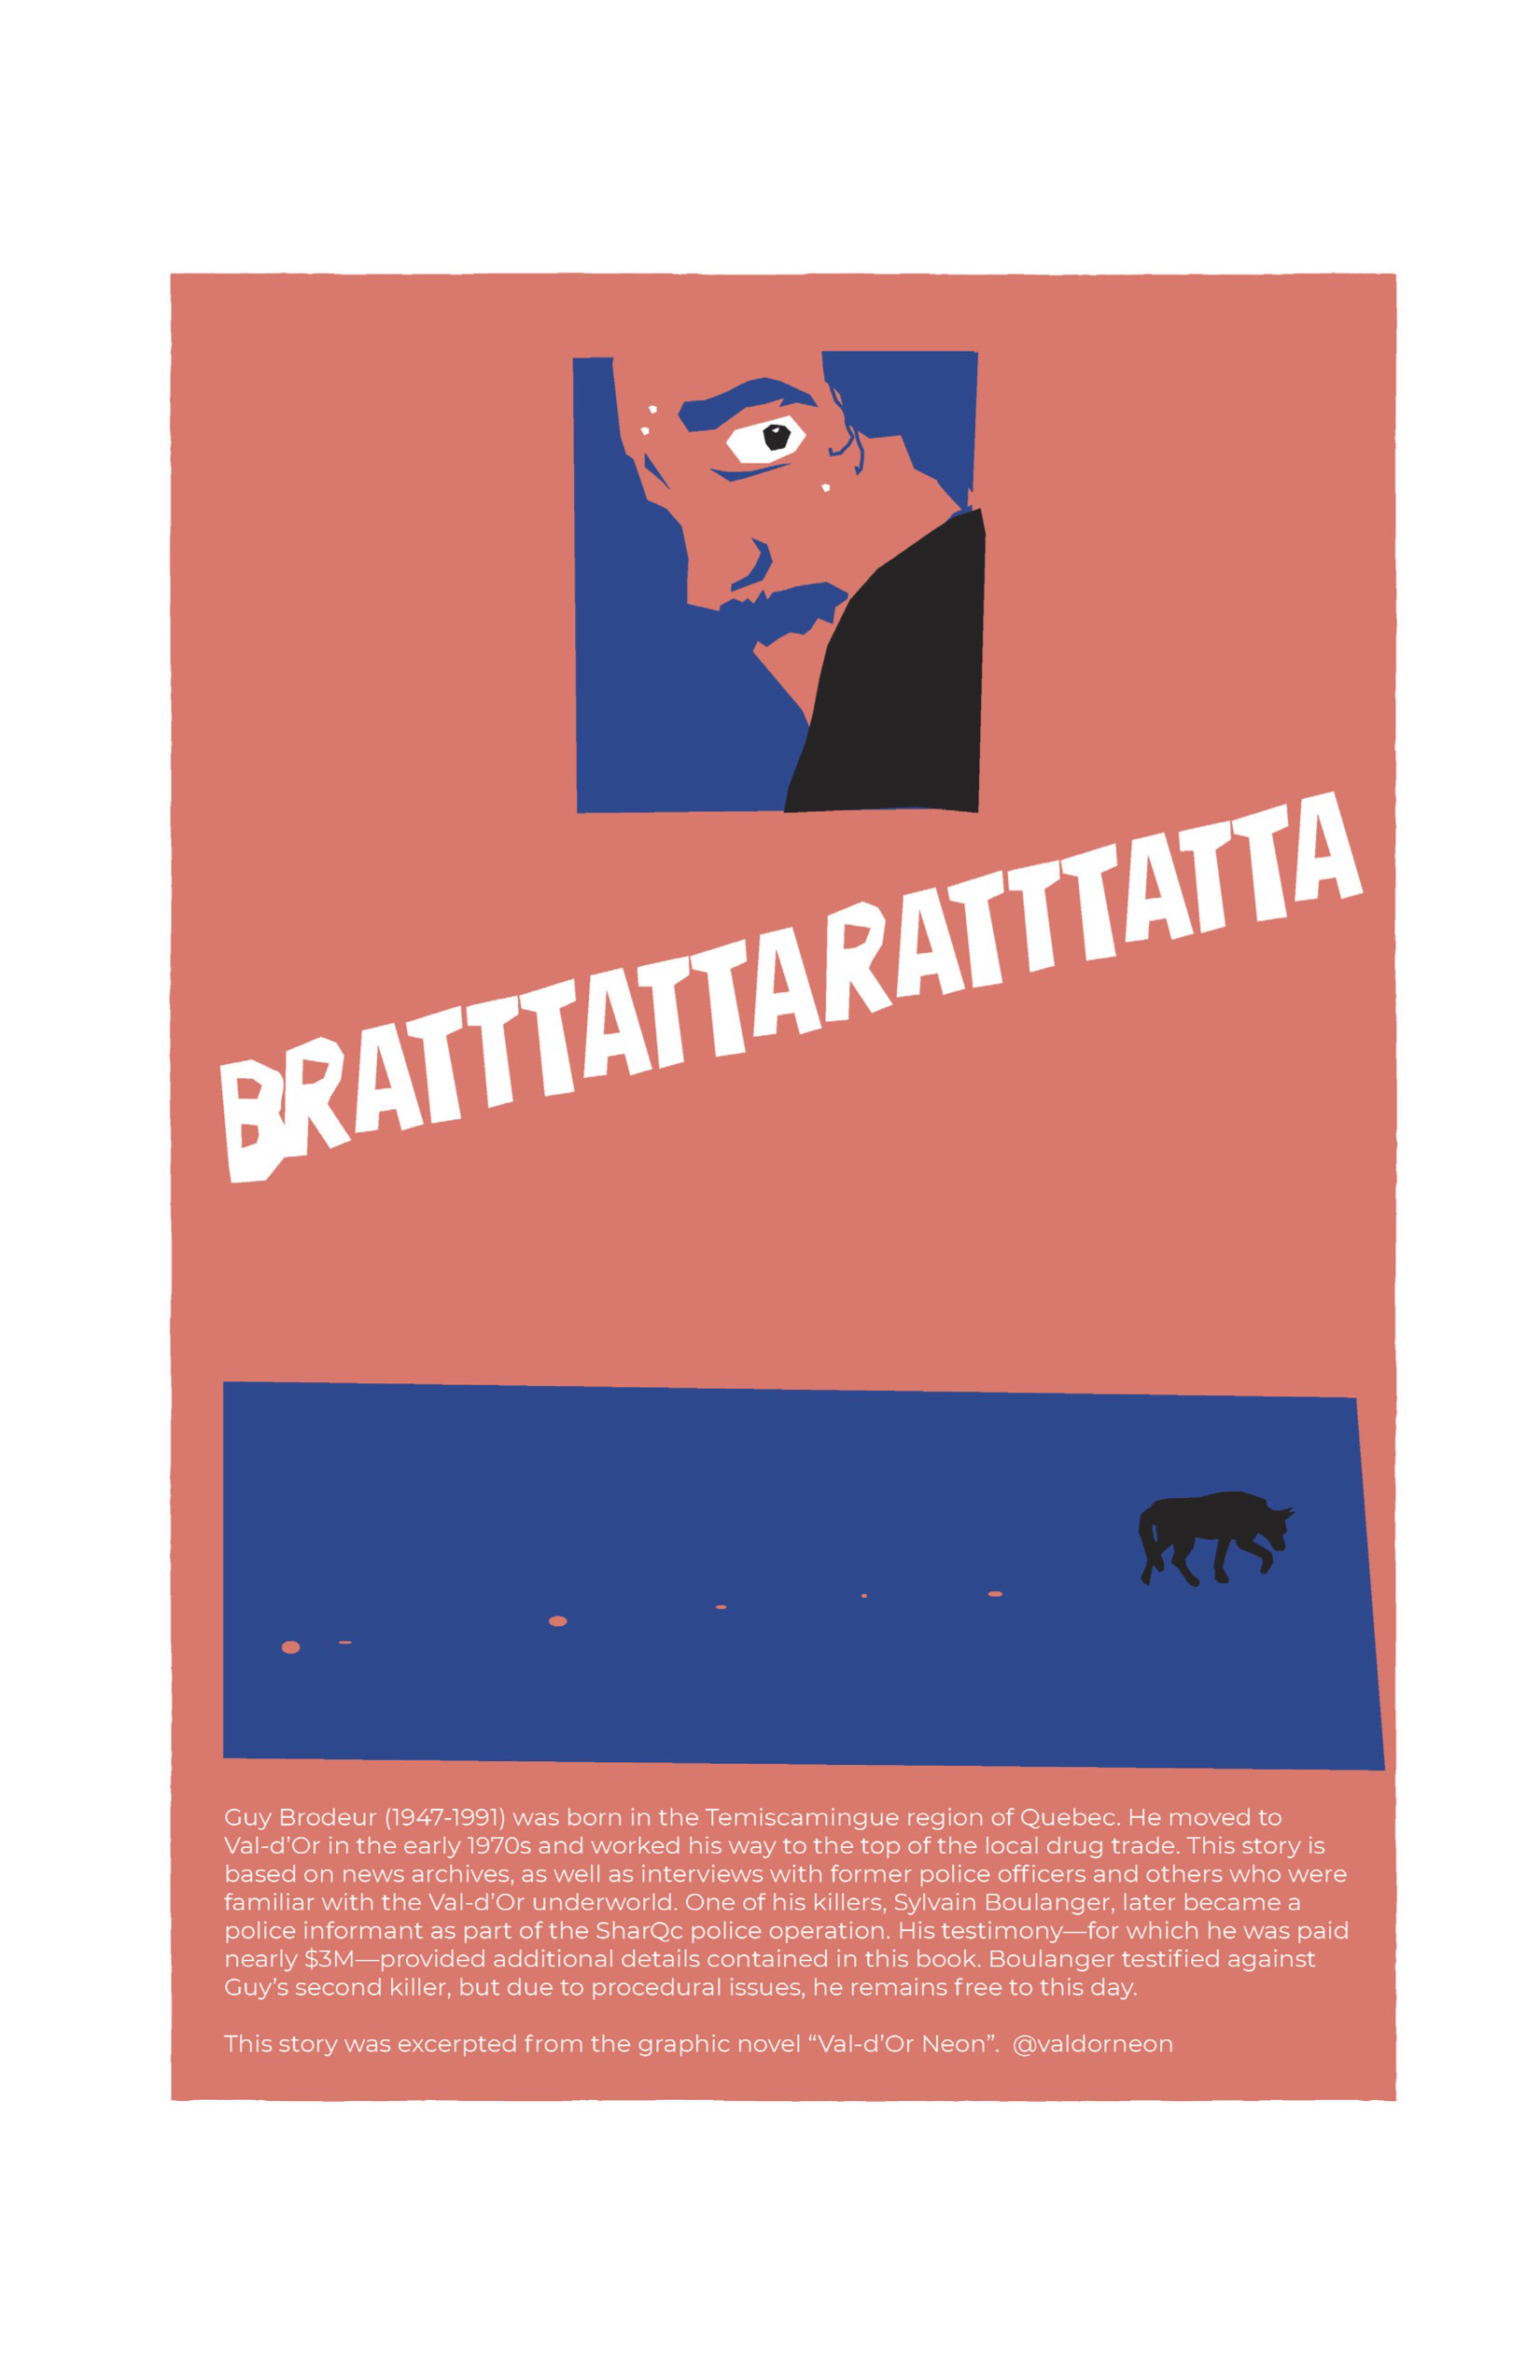 Once again a gutter-less page, the background is peachy orange. An inset panel at the top of the page shows a close-up of Guyâ€™s face looking over his shoulder from the ground. He looks nervous and grim. 
Below this panel, â€œBRATTTATTARATTTATTAâ€ stretches across the width of the page diagonally in large white letters. 
In another inset panel below that, with a dark blue background, Guyâ€™s dog, a black silhouette, walks off in the distance, leaving behind a trail of blood. 

At the bottom of the page, written in a thin white font different from the rest of the lettering, reads the text, â€œGuy Brodeur (1947-1991) was born in the Temiscamingue region of Quebec. He moved to Val-dâ€™Or in the early 1970s and worked his way to the top of the local drug trader. This story is based on news archives, as well as interviews with former police officers and others who were familiar with the Val-dâ€™Or underworld. One of his killers, Sylvain Boulanger, later became a police informant as part of the SharQc police operation. His testimonyâ€”for which he was paid nearly $3Mâ€”provided additional details contained in this book. Boulanger testified against Guyâ€™s second killer, but due to procedural issues, he remains free to this day. This story was excerpted from the graphic novel â€˜Val-dâ€™Or Neon.â€™ @valdorneon.â€